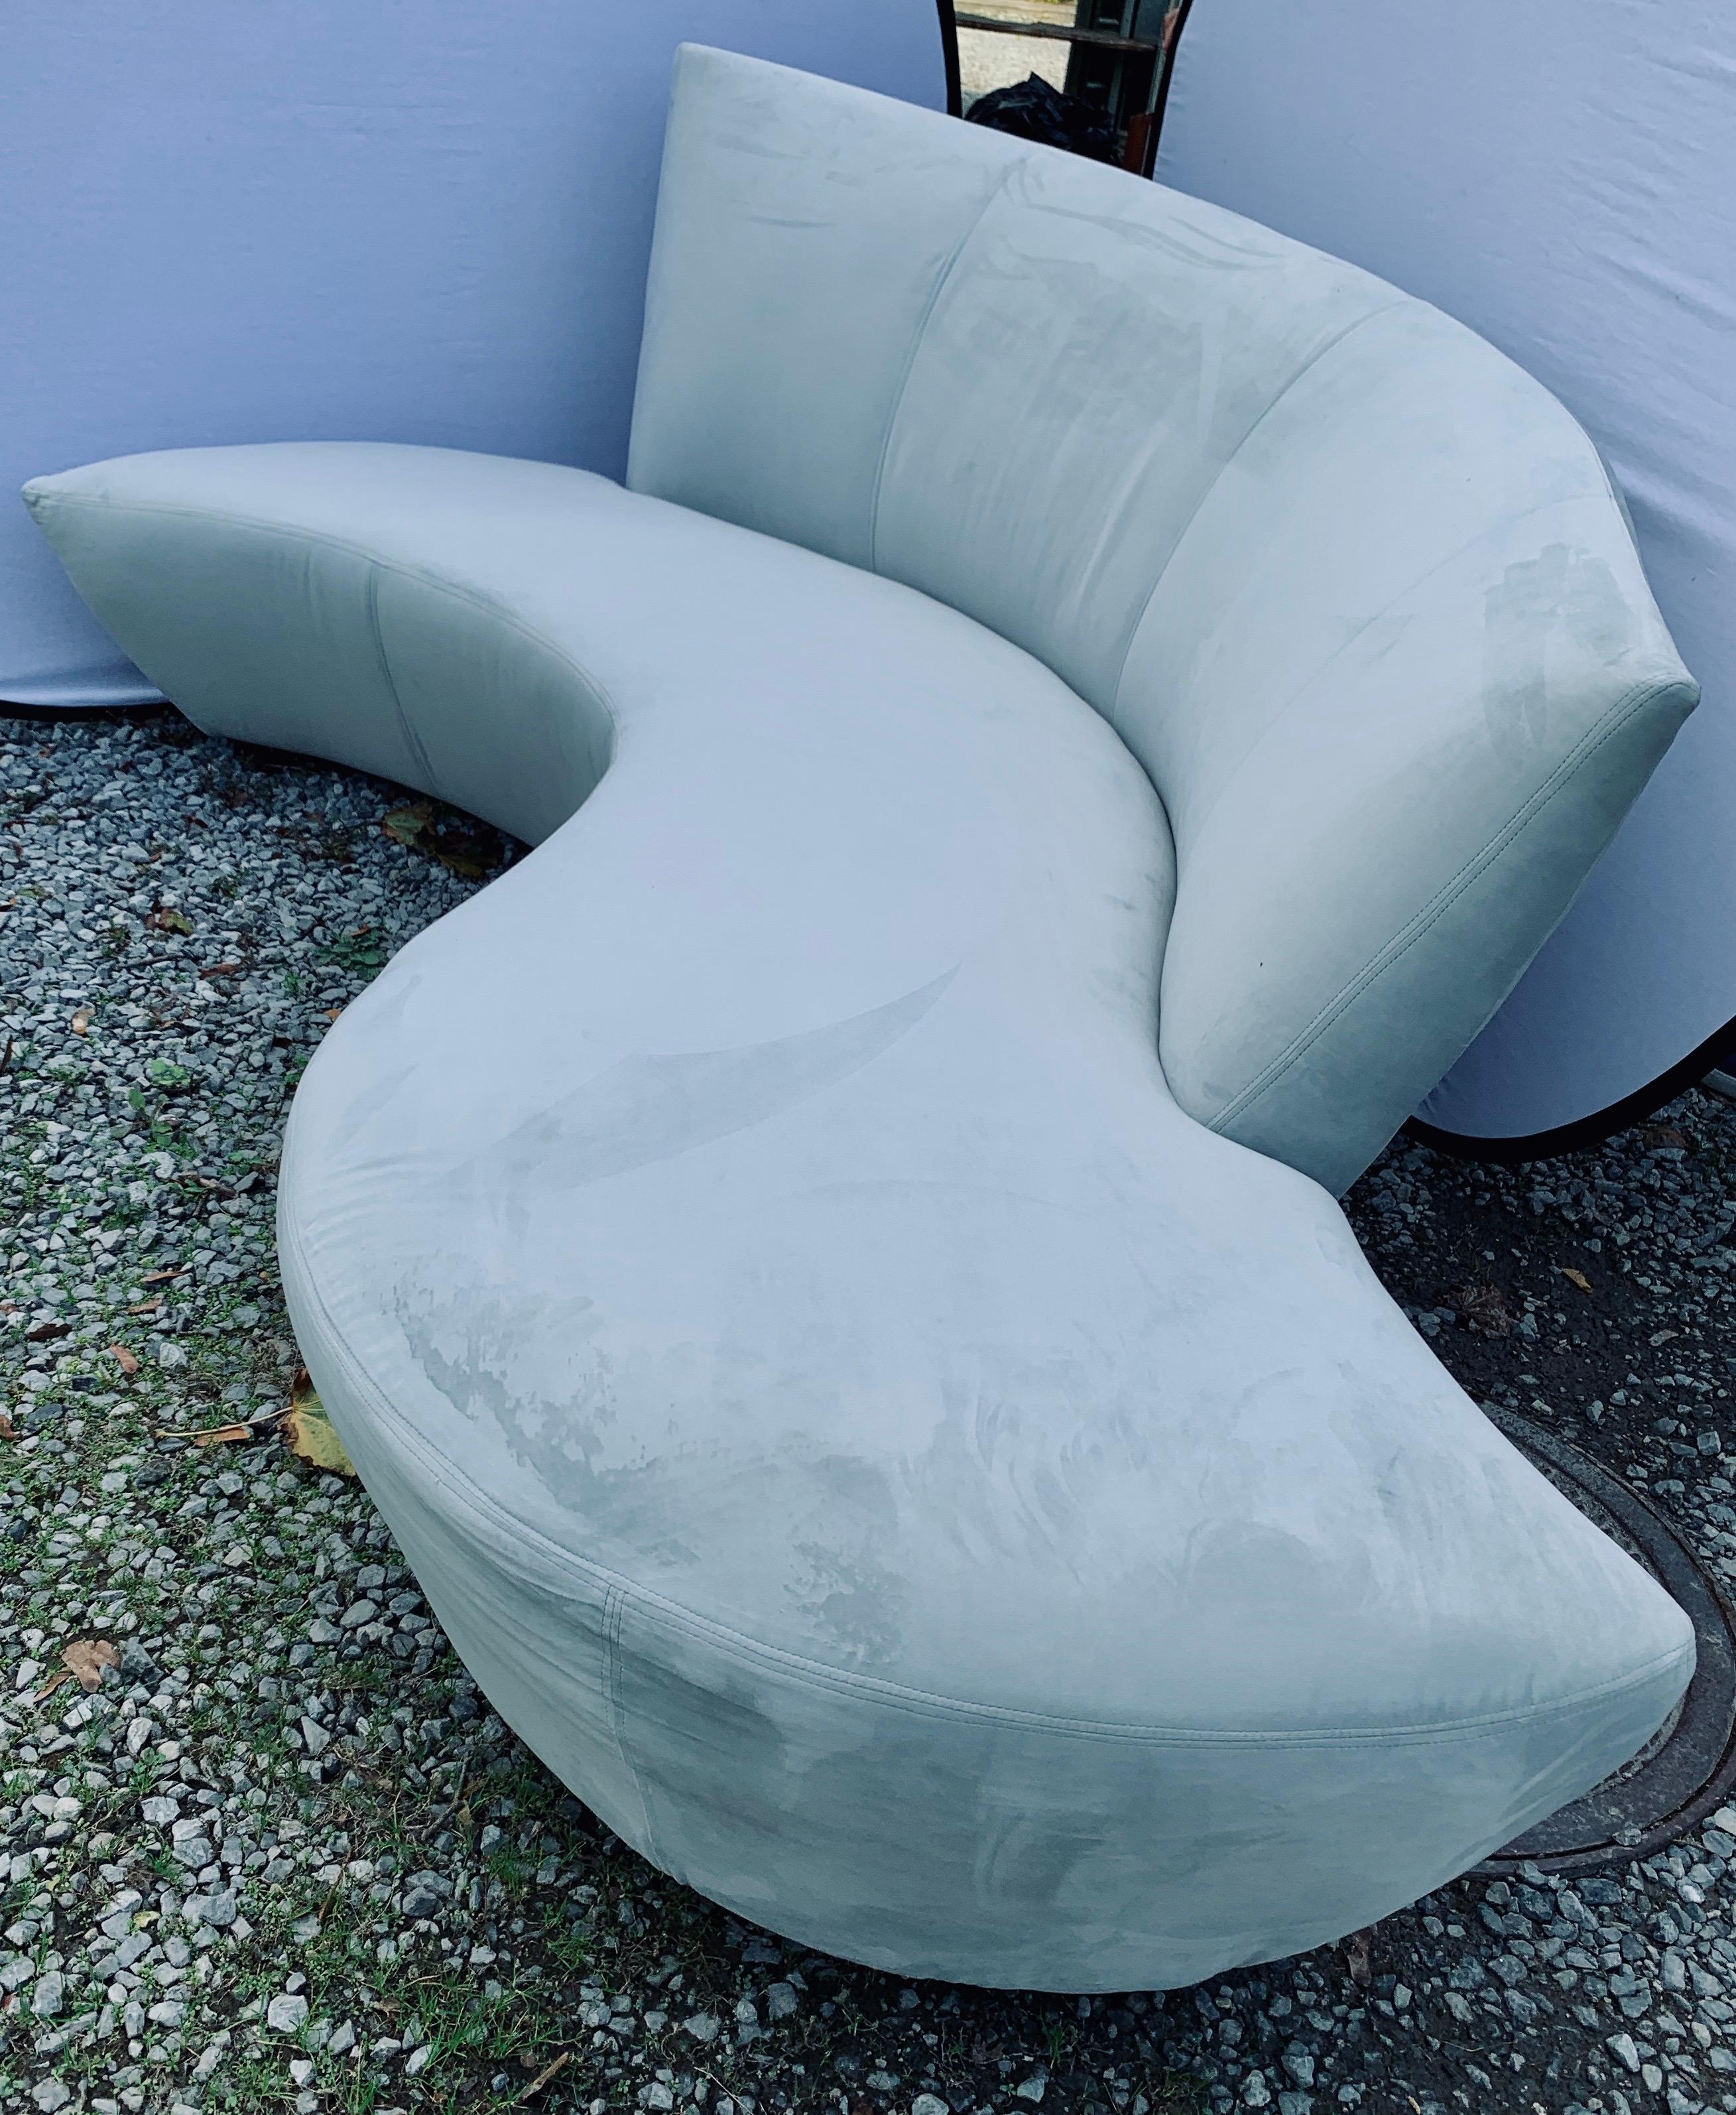 A sculptural mid century modern style sofa designed by Vladimir Kagan and inspired by the curves and undulations of the Guggenheim Museum in Bilbao Spain. It was newly reupholstered last year and is stunning. Rare to see a serpentine Kagan sofa in